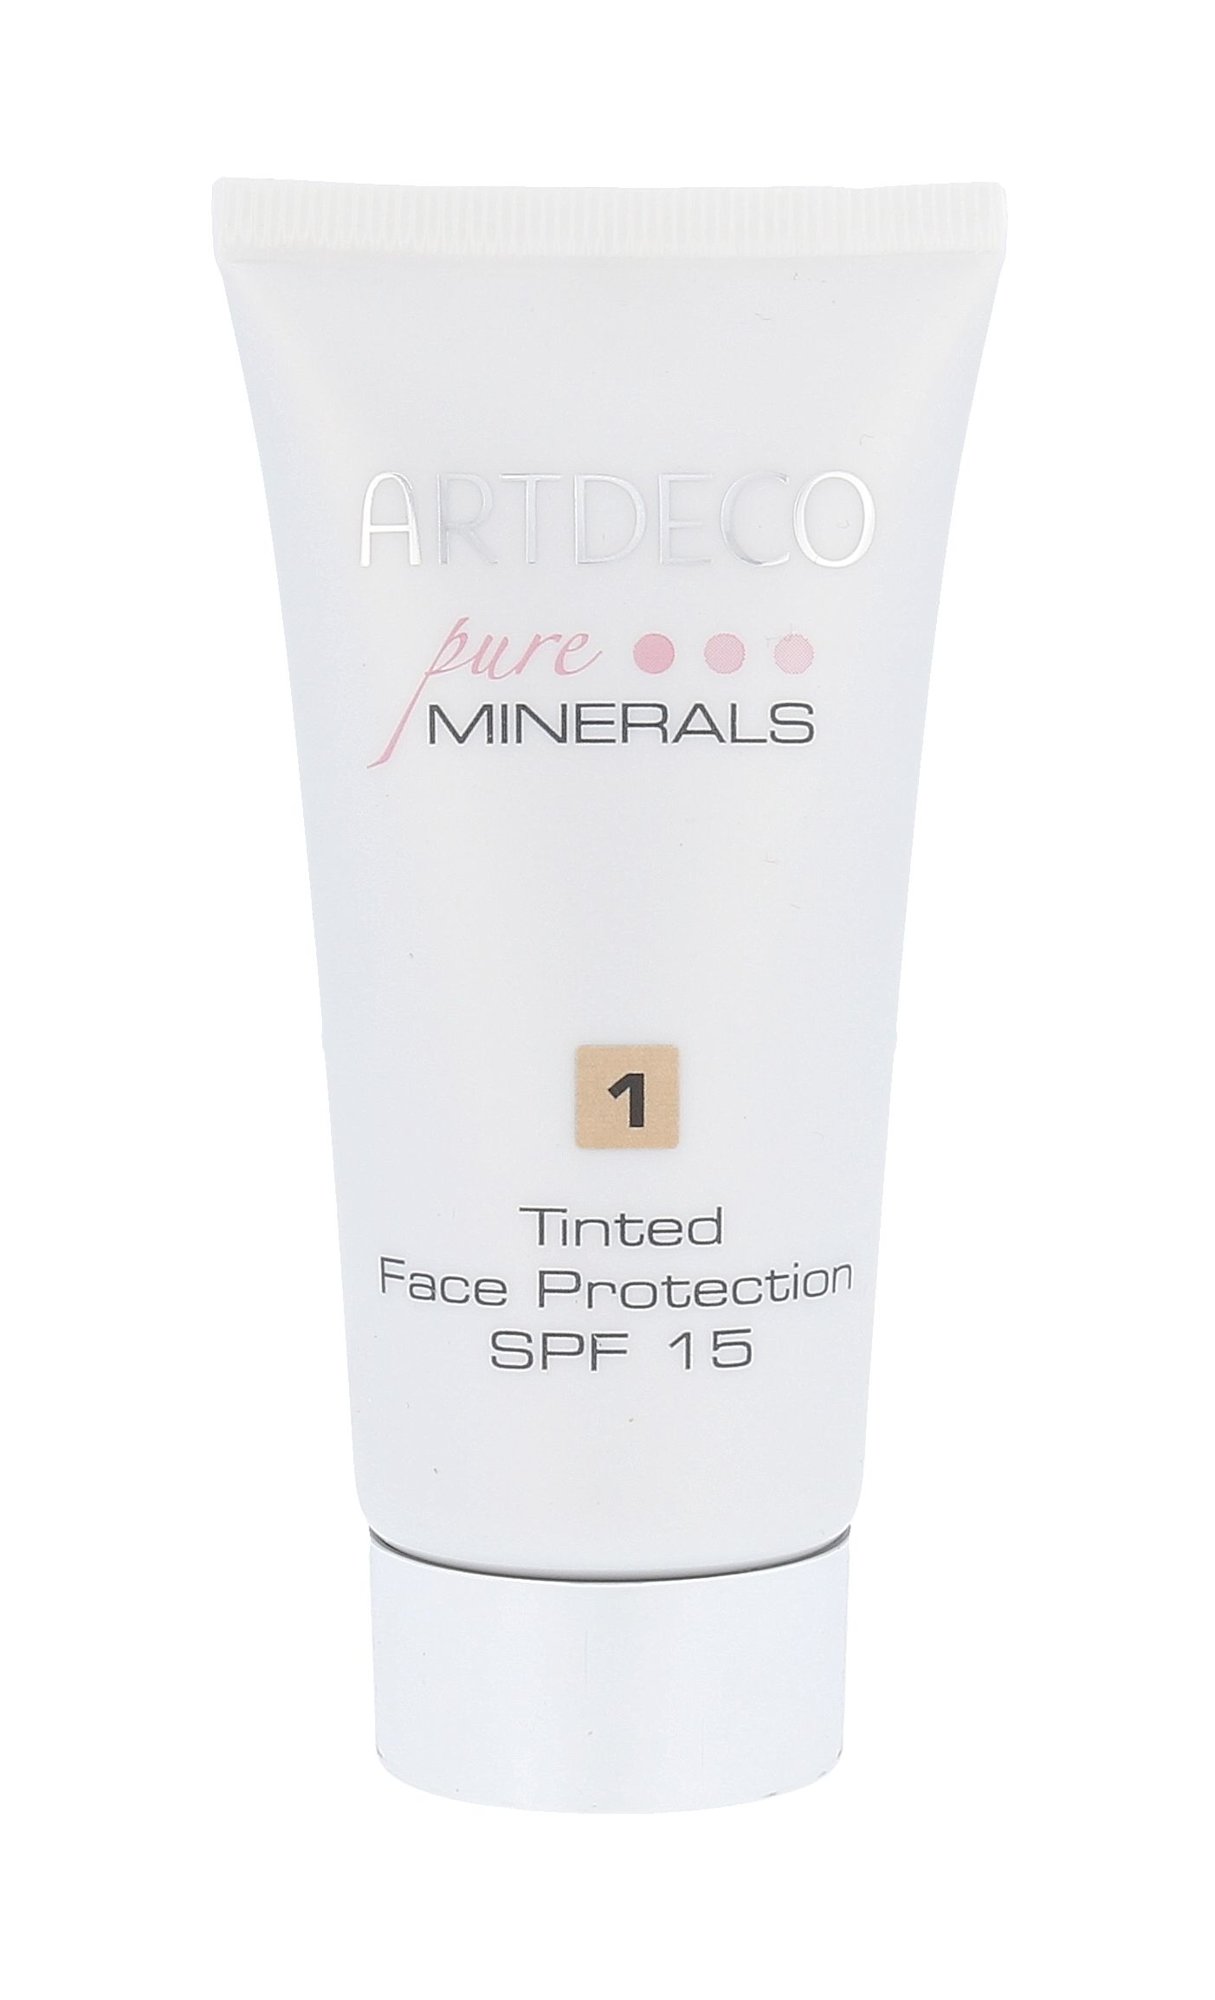 Artdeco Pure Minerals Tinted Face Protection SPF15